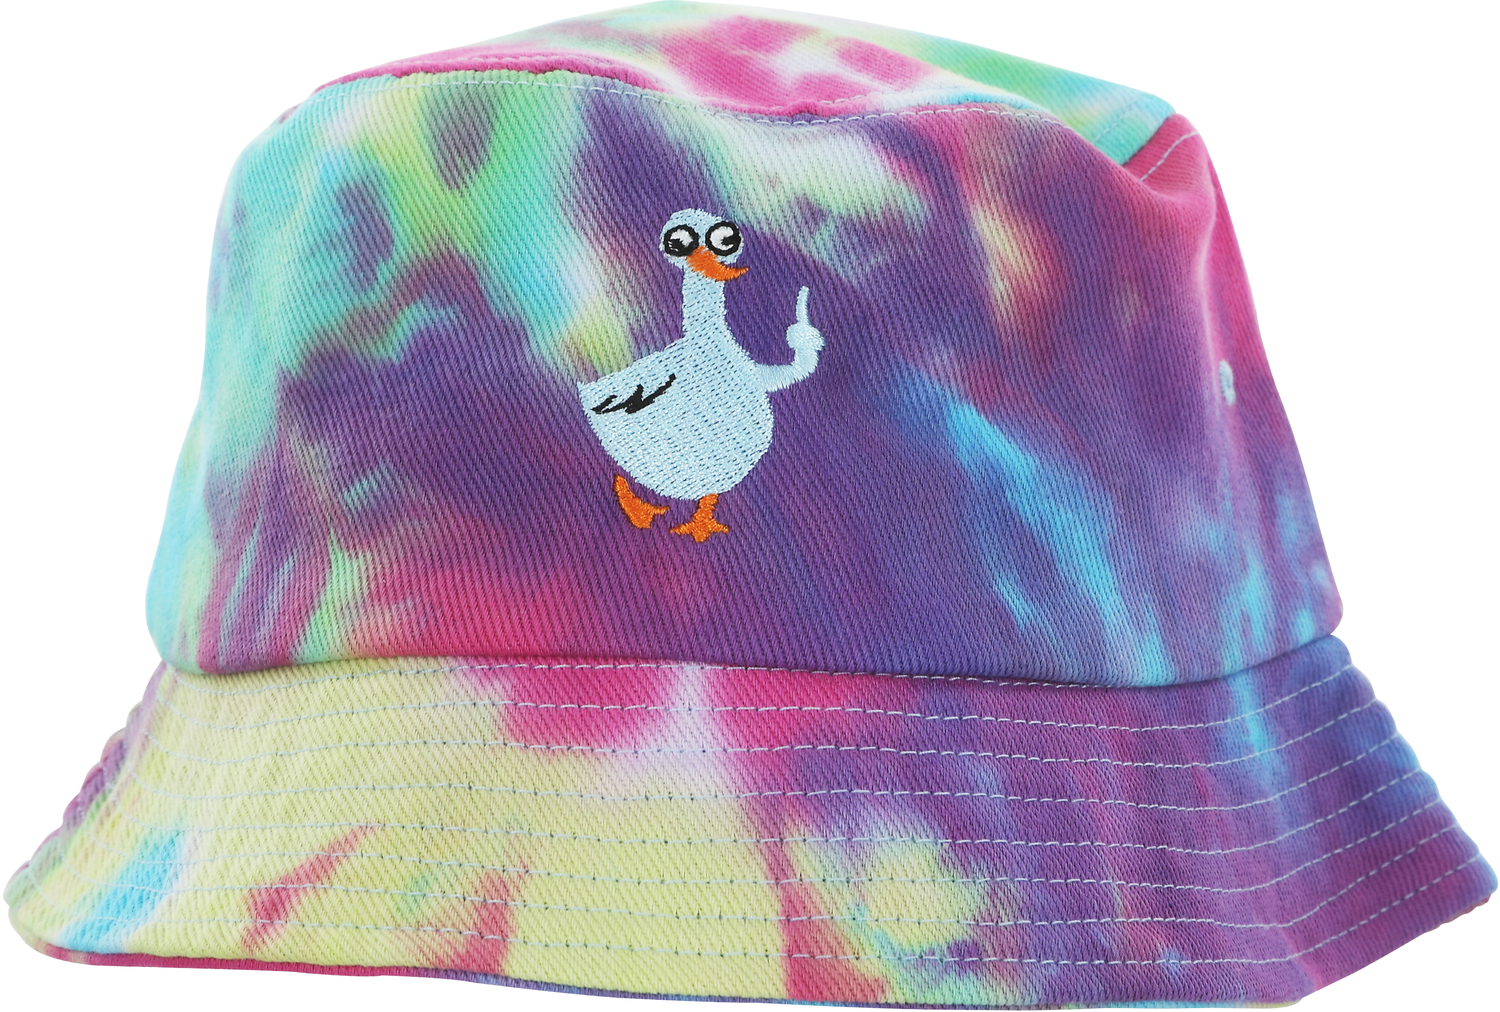 Duck This by Fugly Friends - Duck This - Unisex Bucket Hat
(One Size Fits Most)